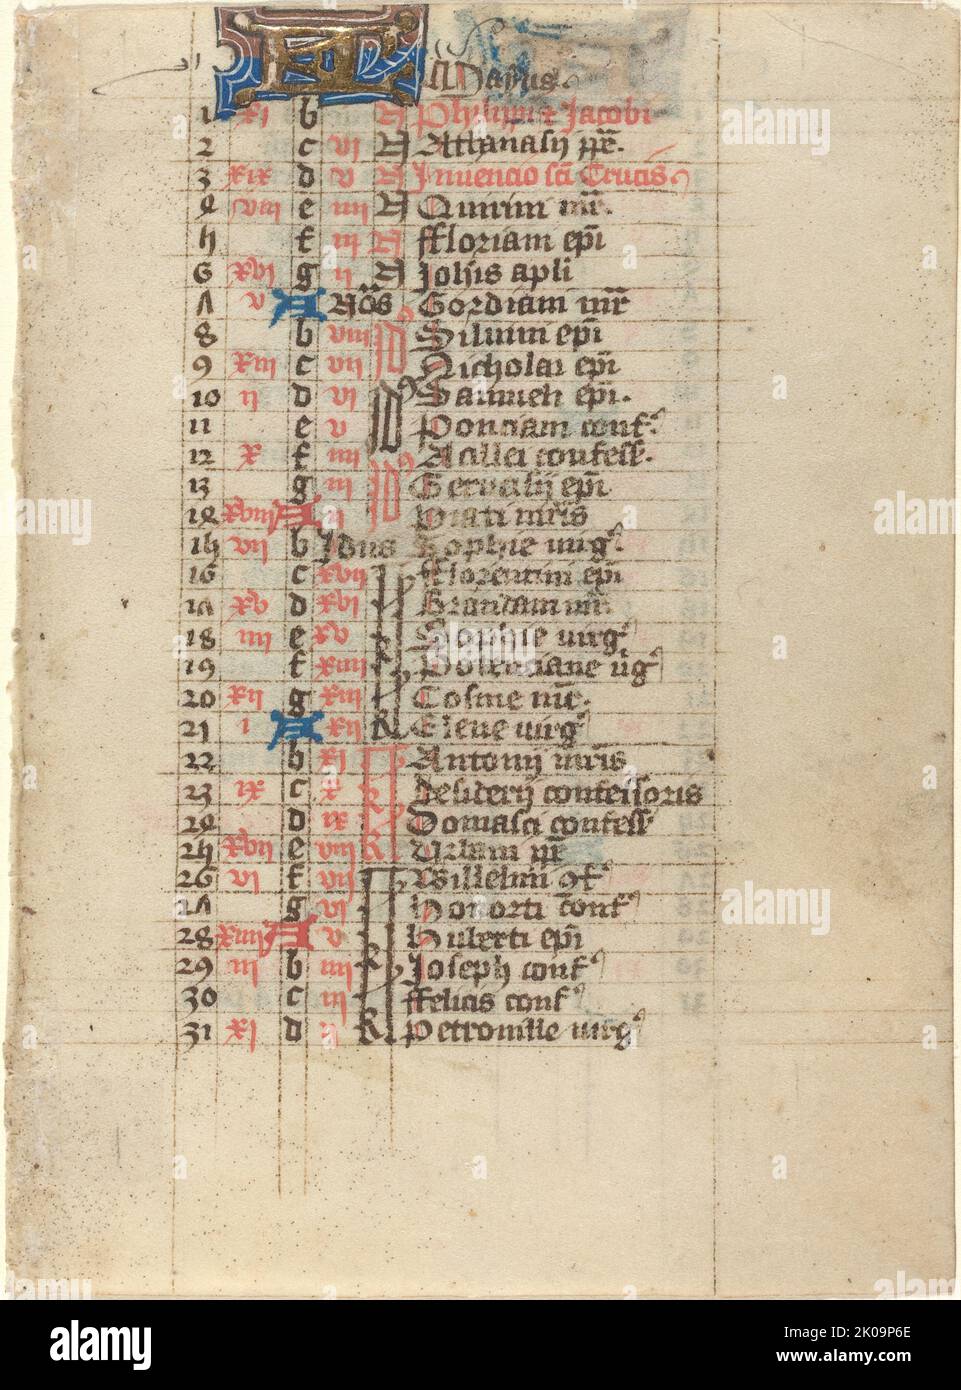 Page from a Book of Hours, c. 1400?. Stock Photo